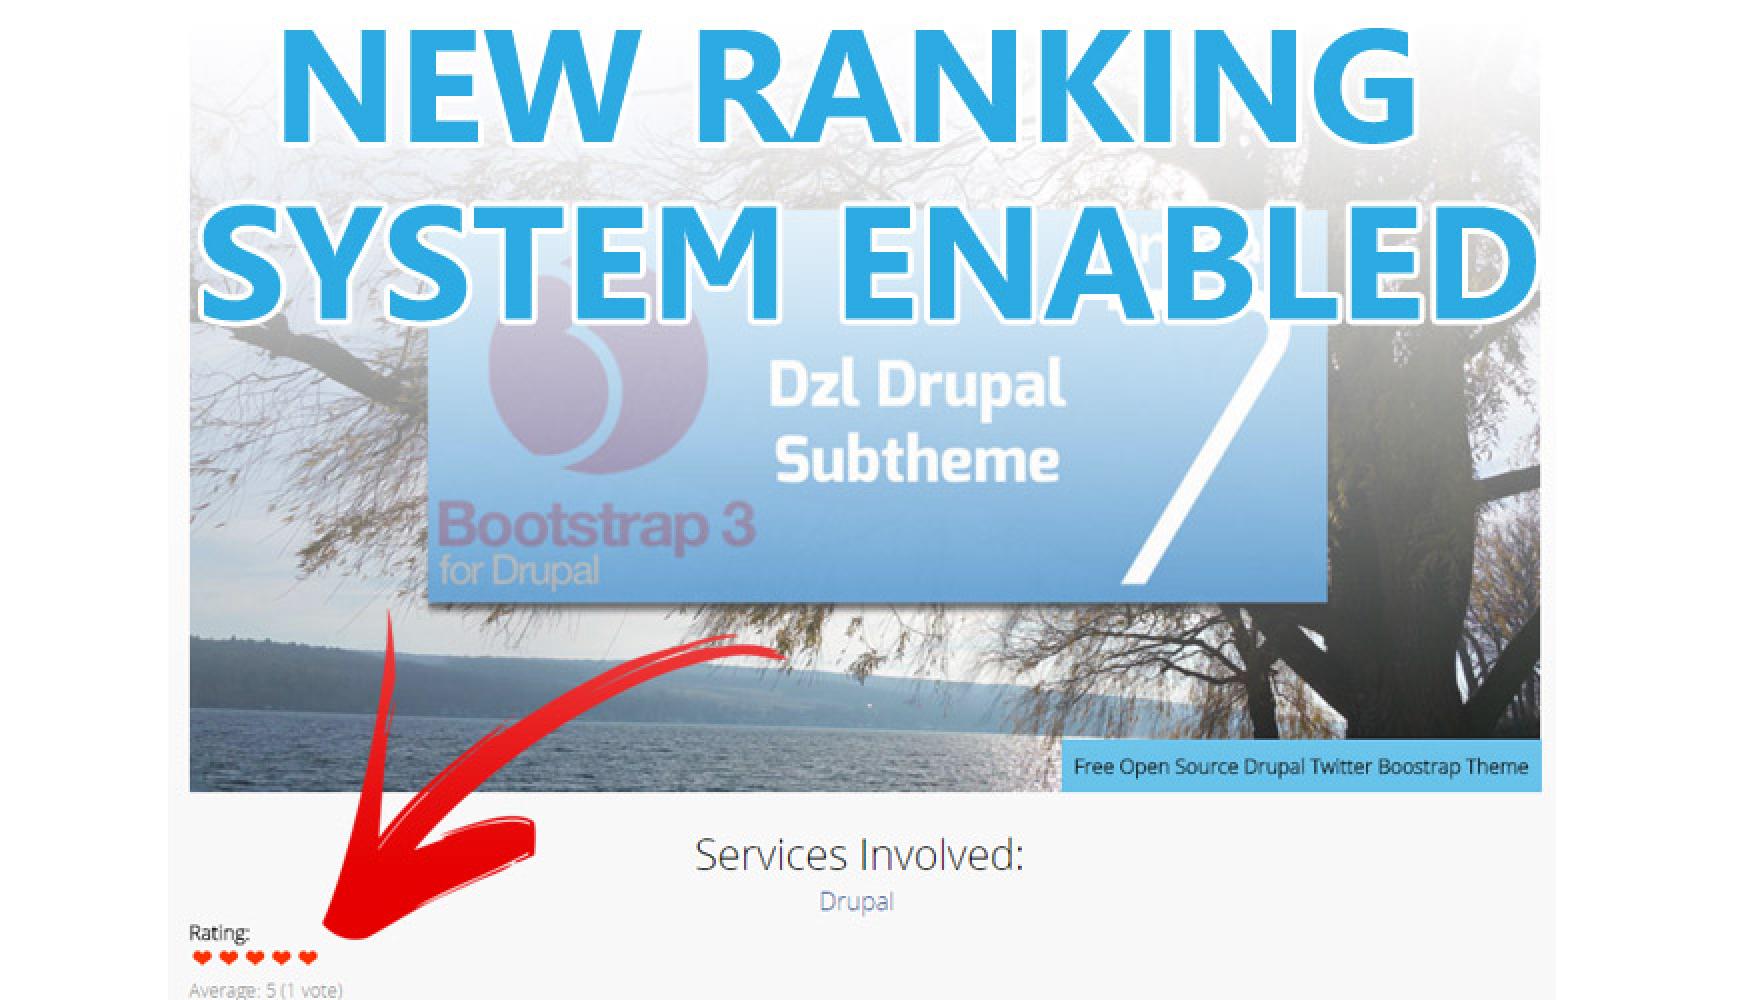 New Ranking System Enabled